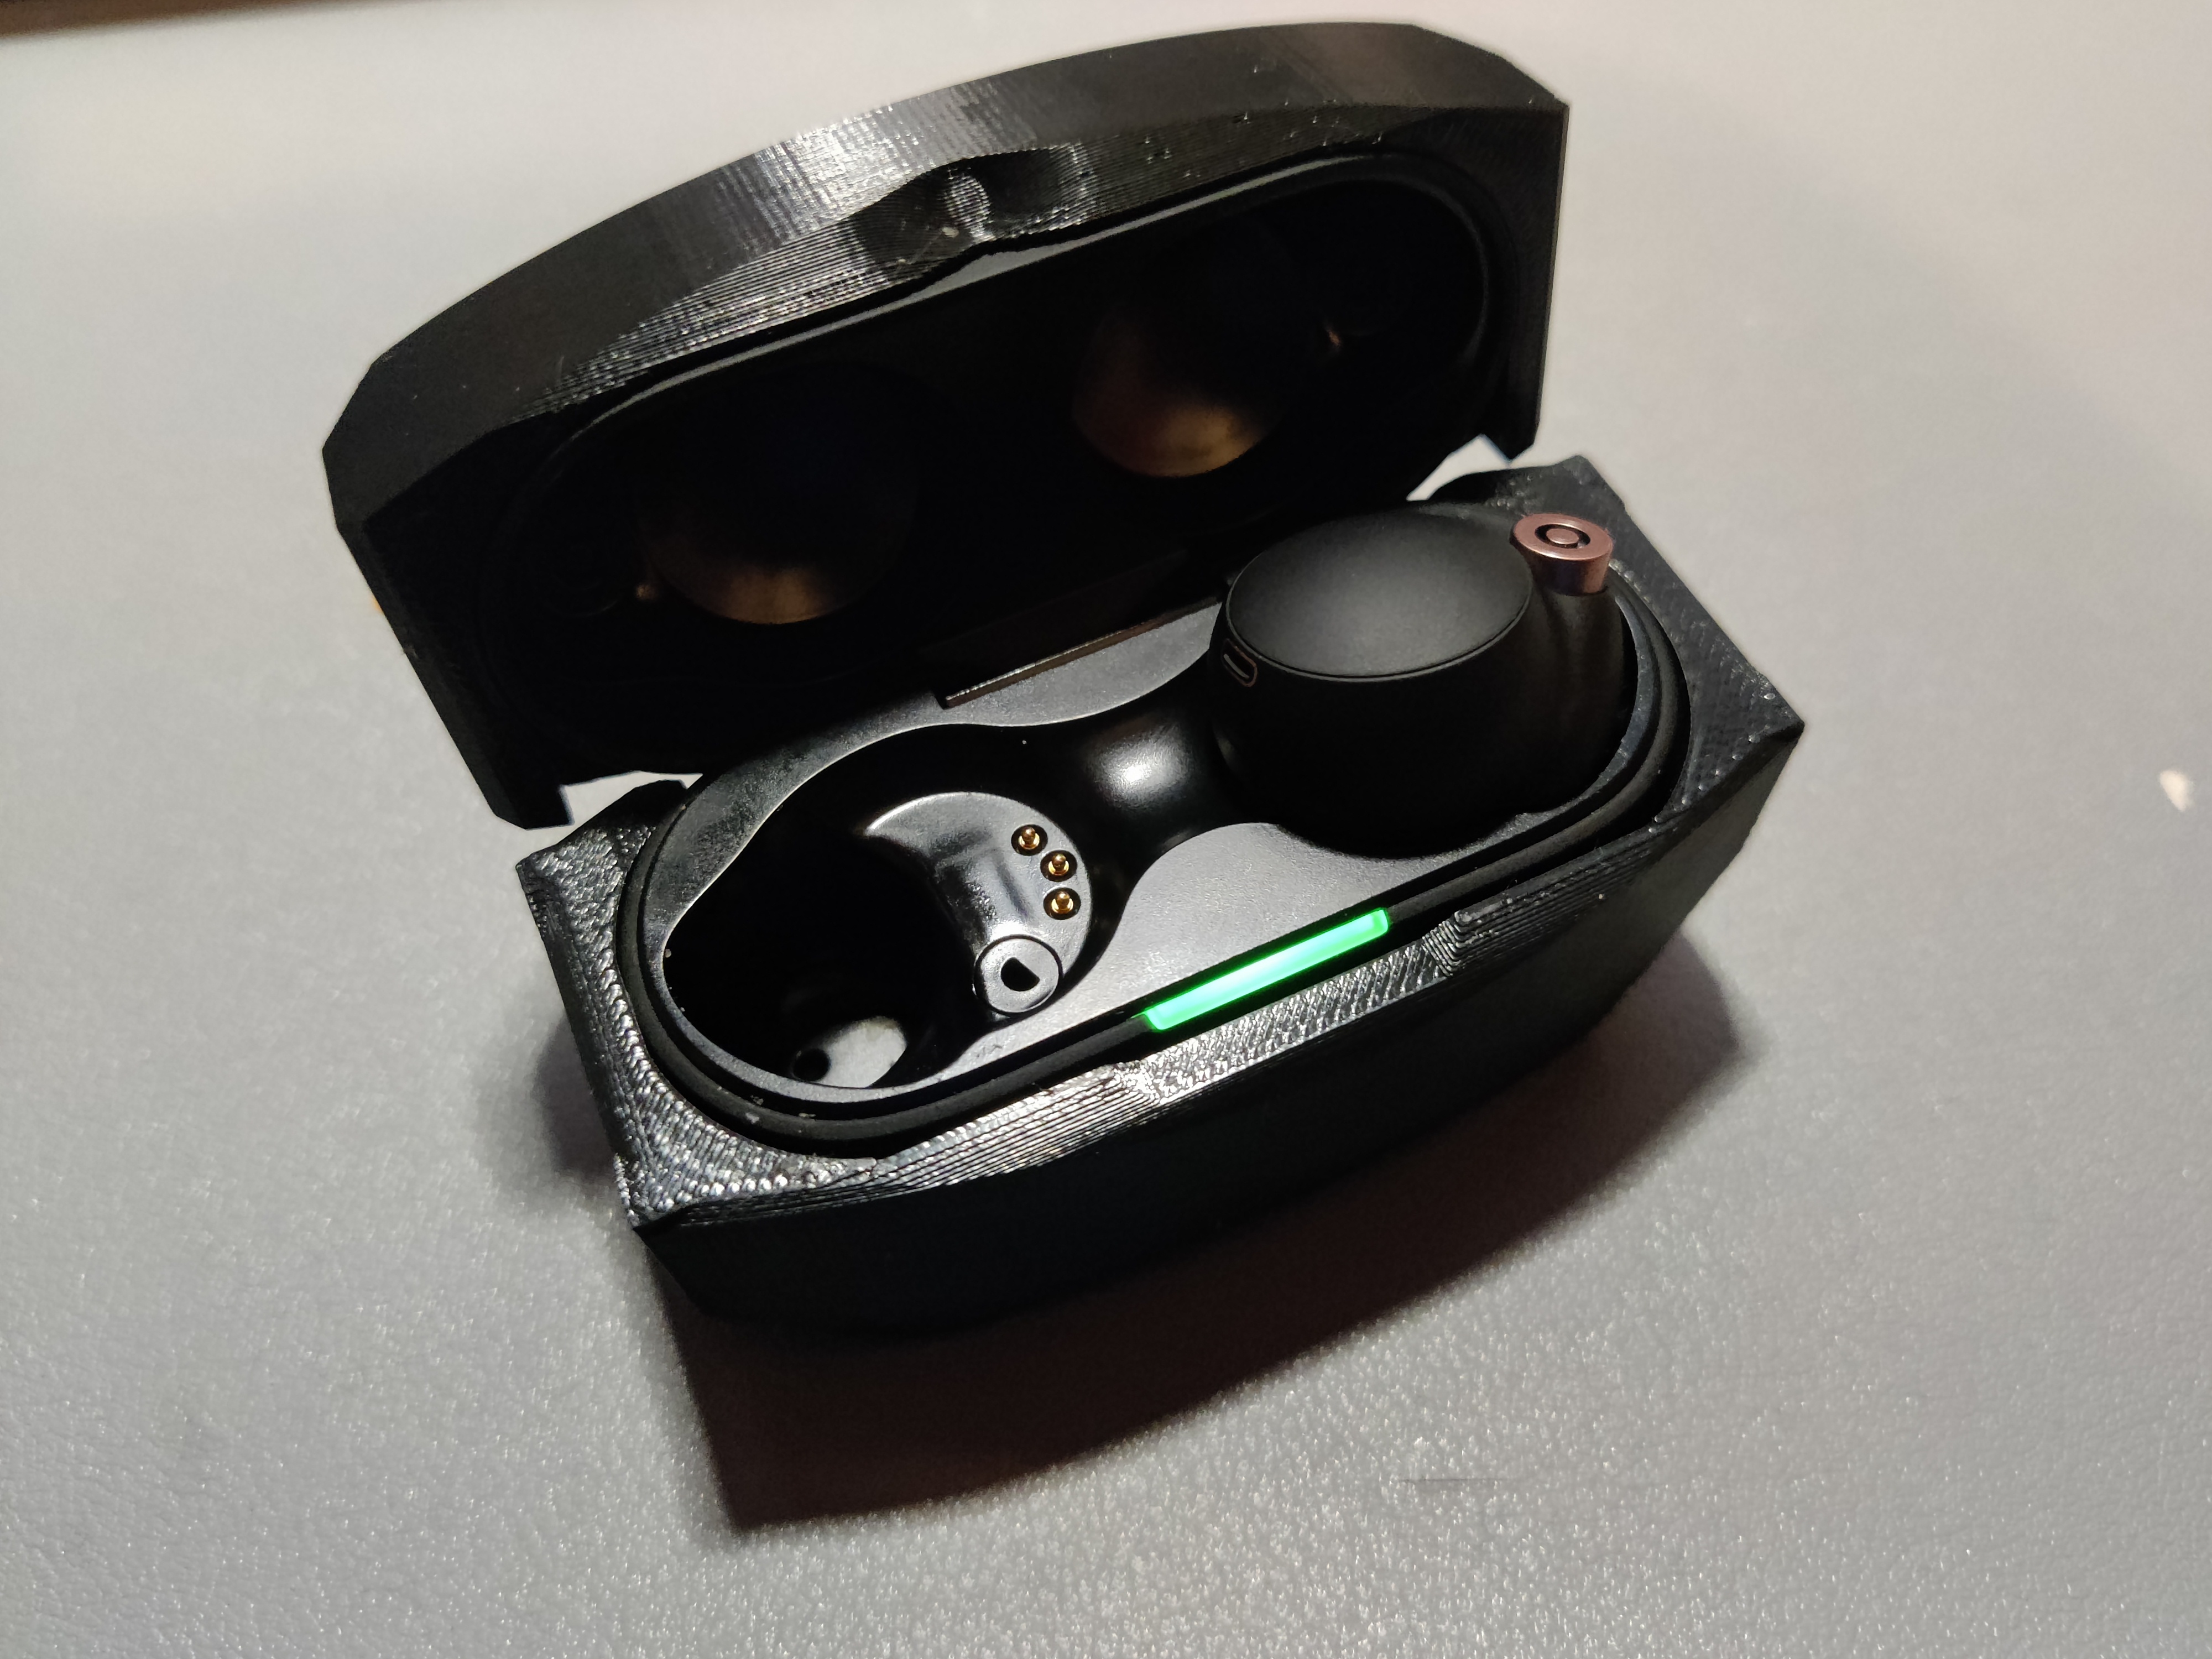 3D printable protective case compatible with WF-1000XM4 earbuds